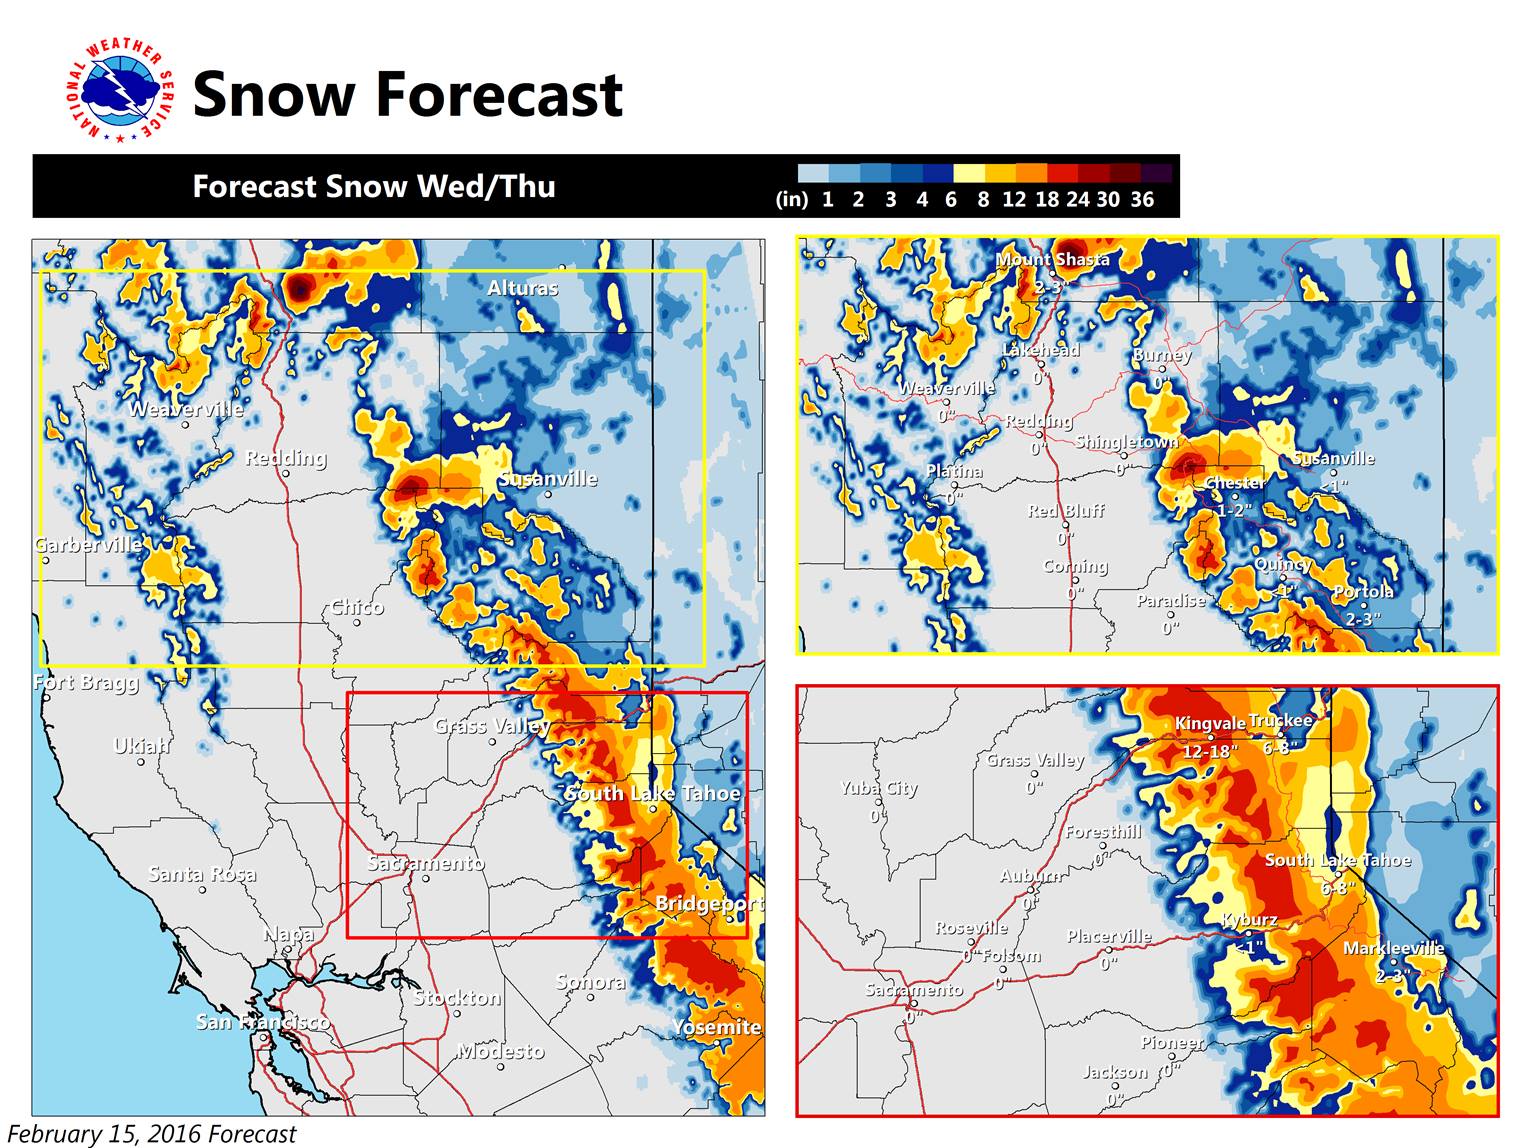 Snowfall forecast map for Wed/Thurs in CA. RED = 18-24" forecast. image: noaa, today